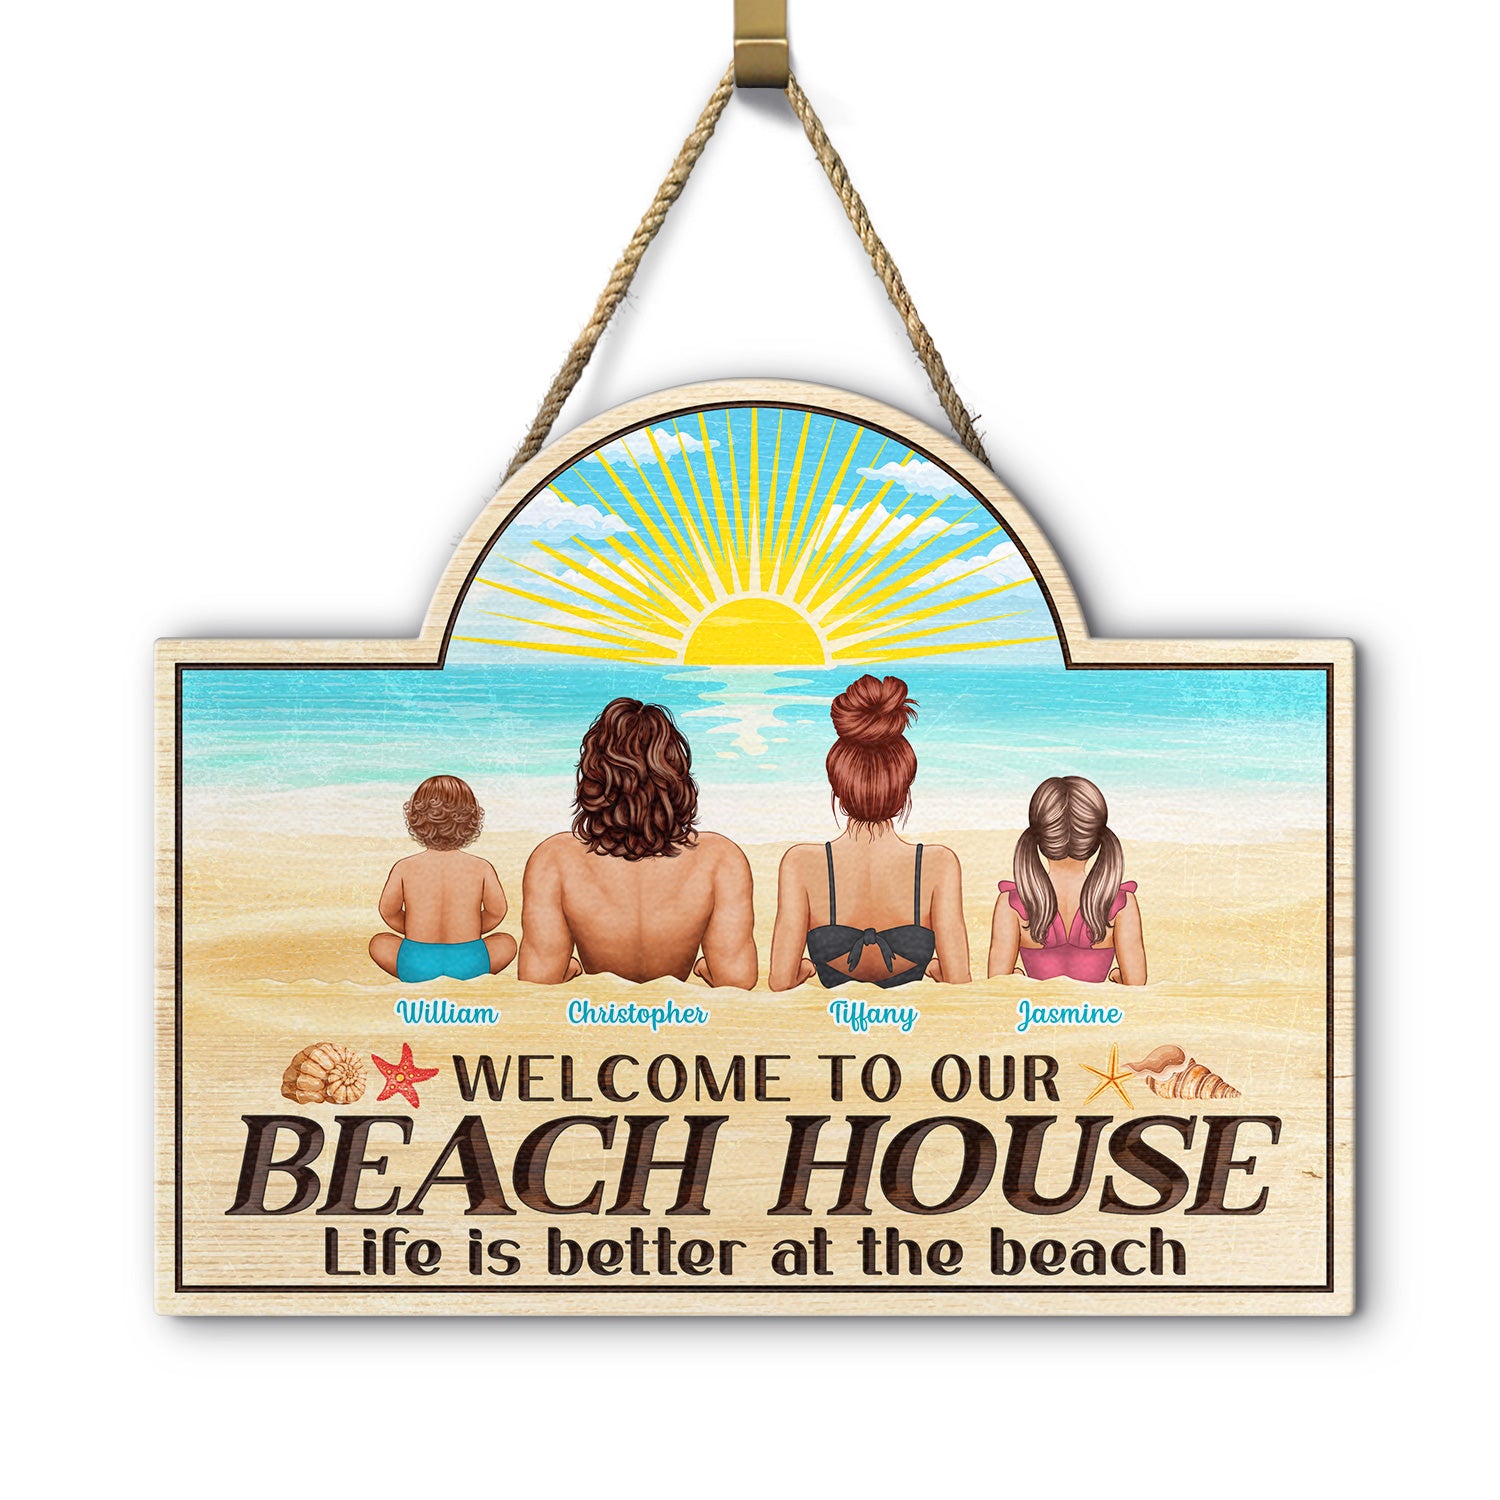 Life Is Better At The Beach - Beach House Decor Gift For Dad Mom - Personalized Custom Shaped Wood Sign